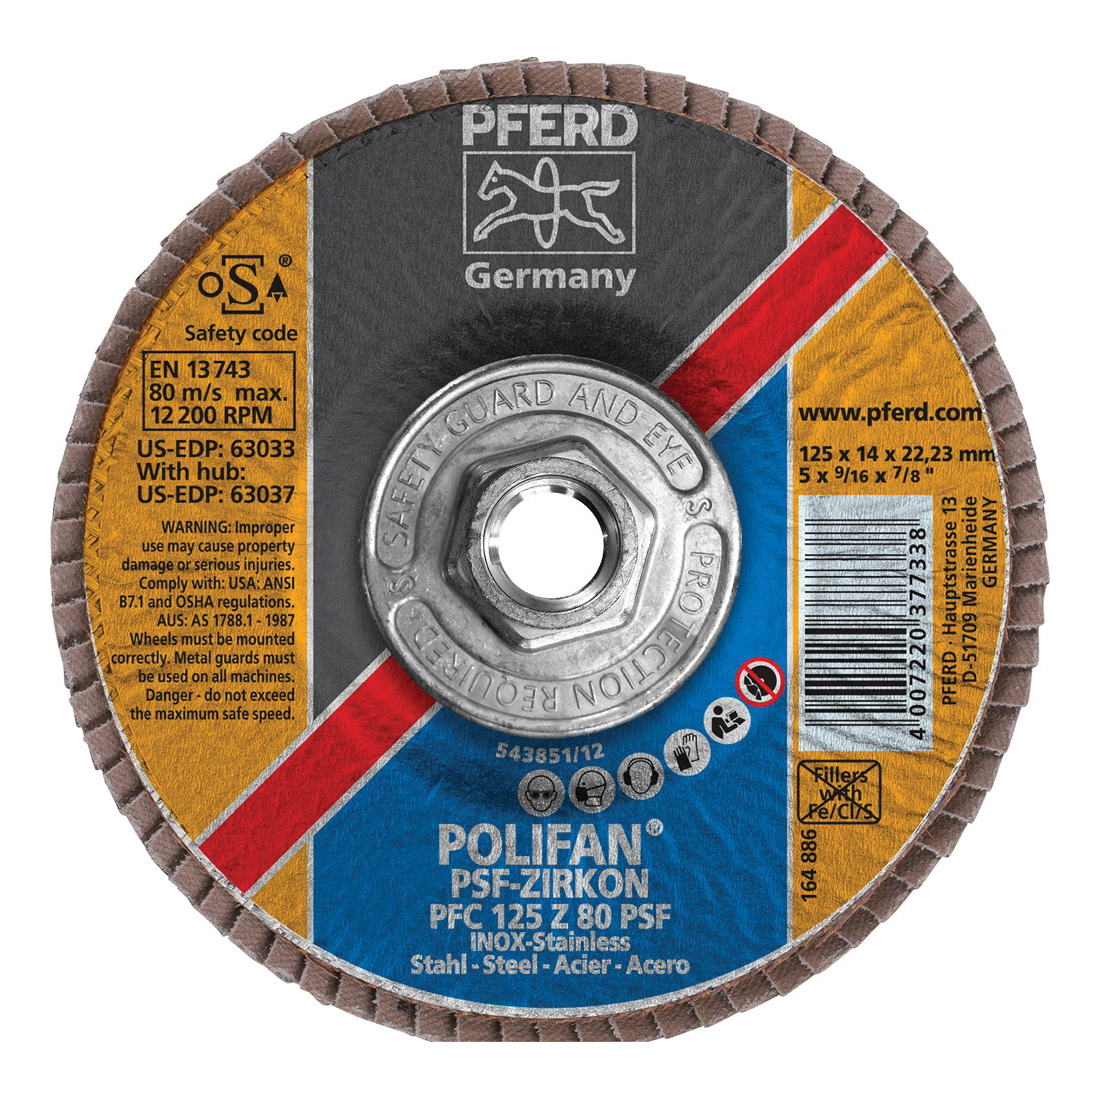 PFERD Polifan® 63037 Universal Line PSF-Z Threaded Coated Abrasive Flap Disc, 5 in Dia, 80 Grit, Zirconia Alumina Abrasive, Type 29 Conical Disc